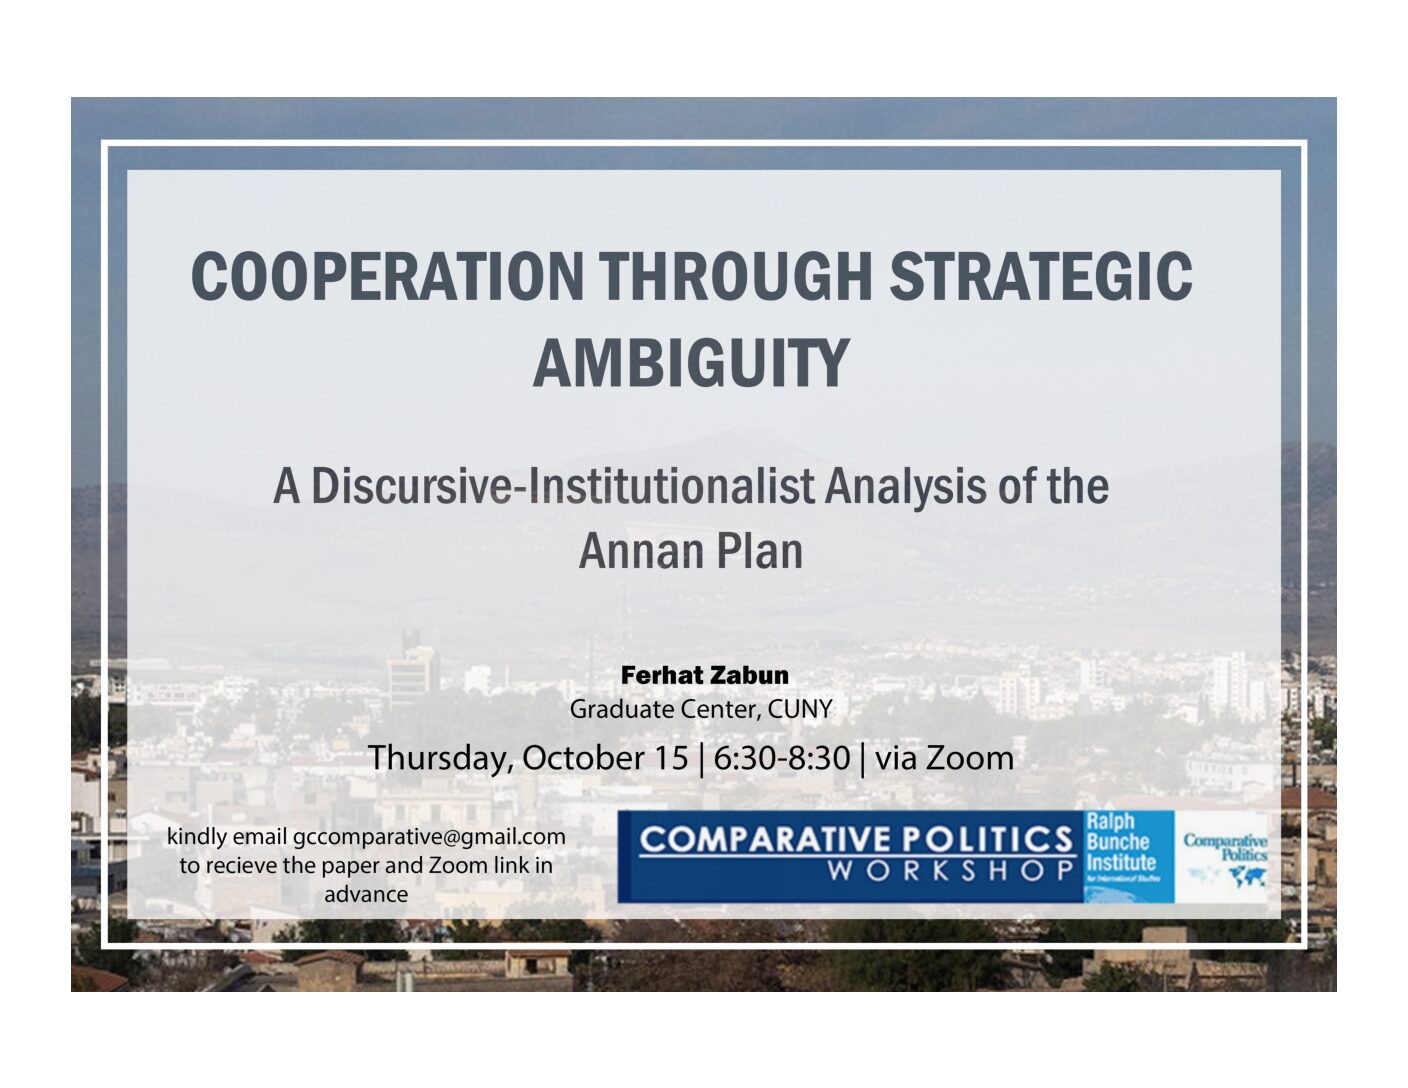 CPW: Ferhat Zabun, “Cooperation through Strategic Ambiguity: A Discursive-Institutionalist Analysis of the Annan Plan” Thursday, October 15, 6:30PM